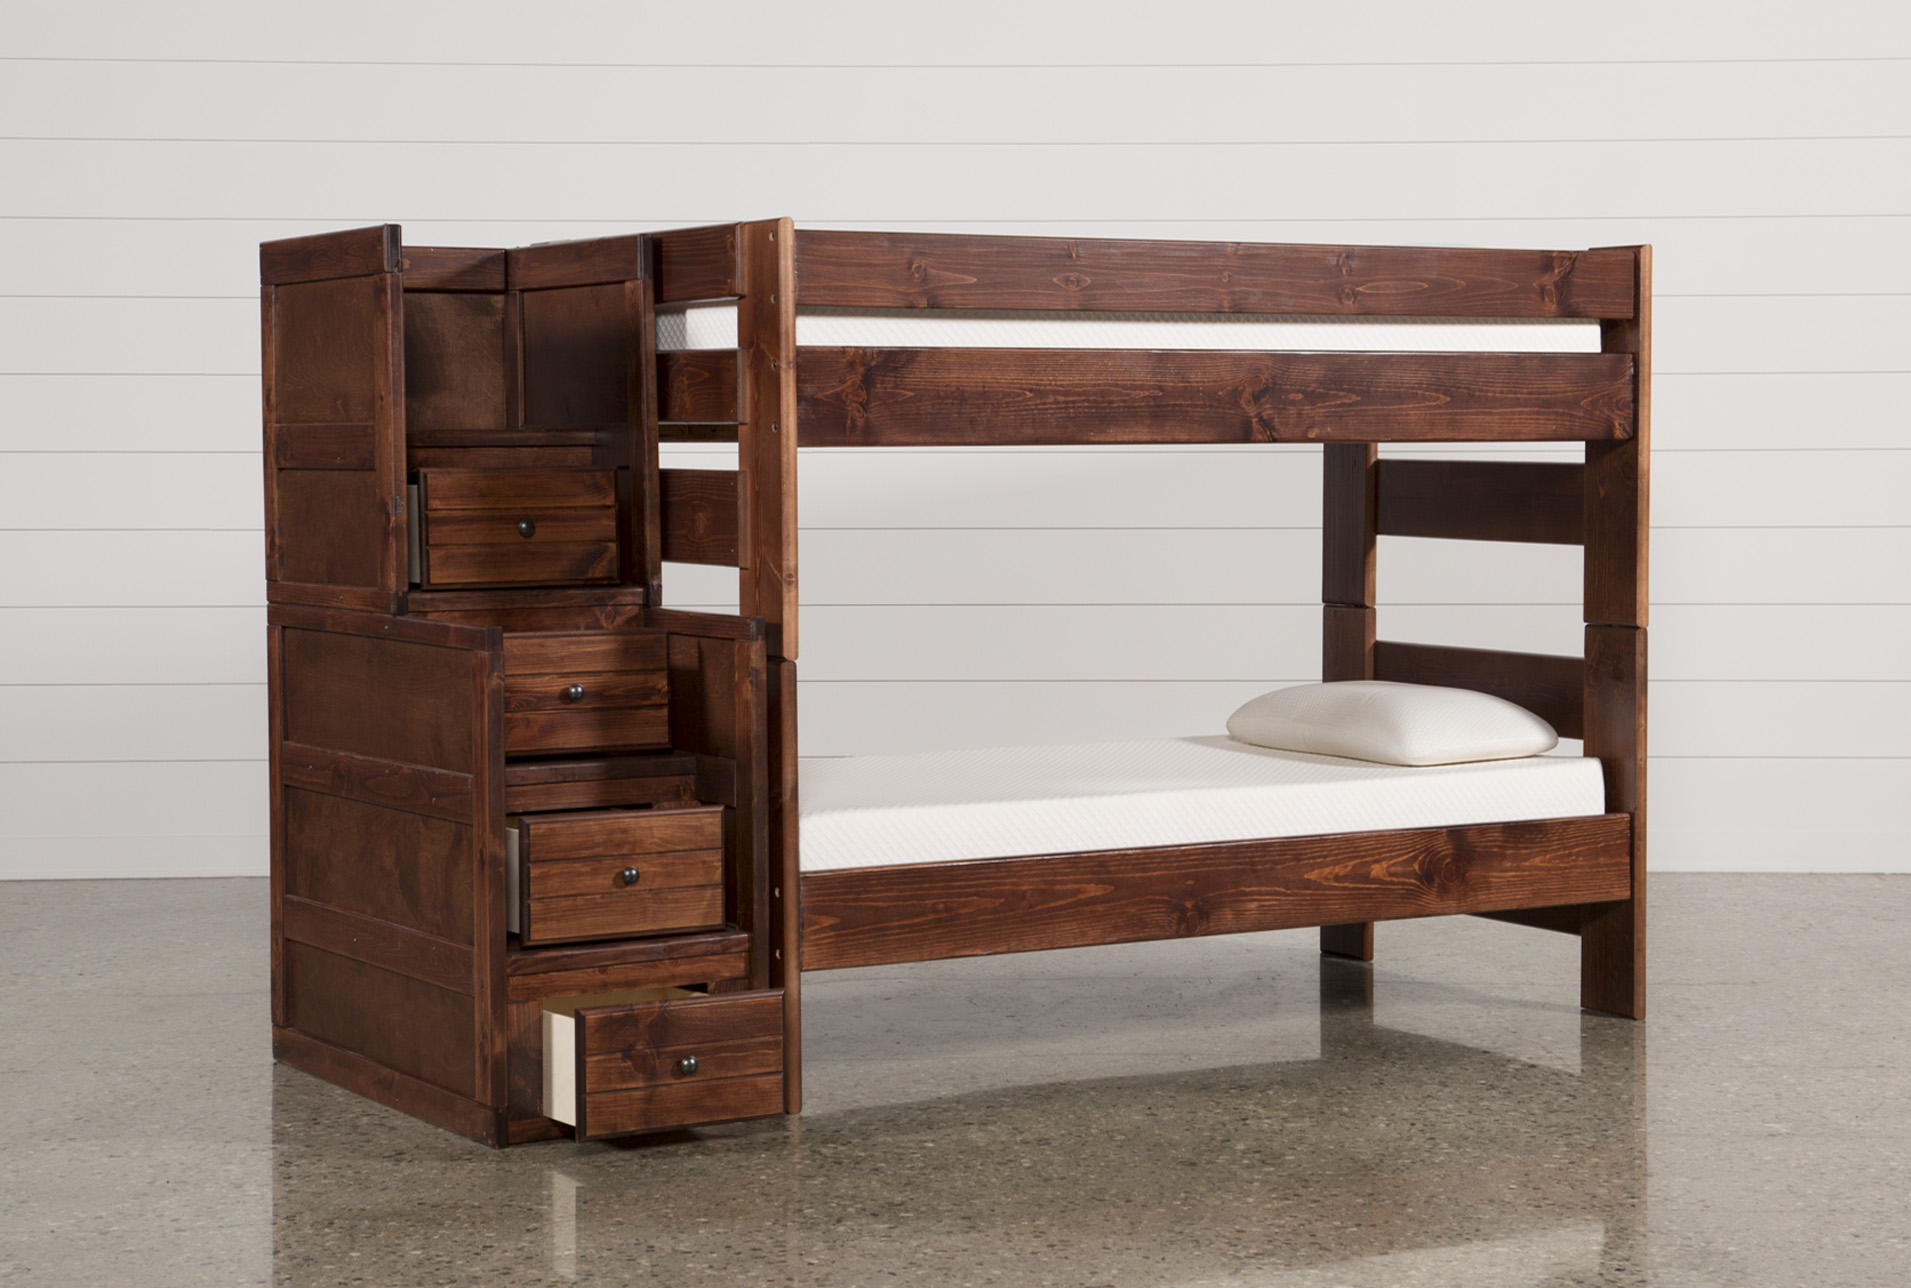 bunk beds with stairs and drawers